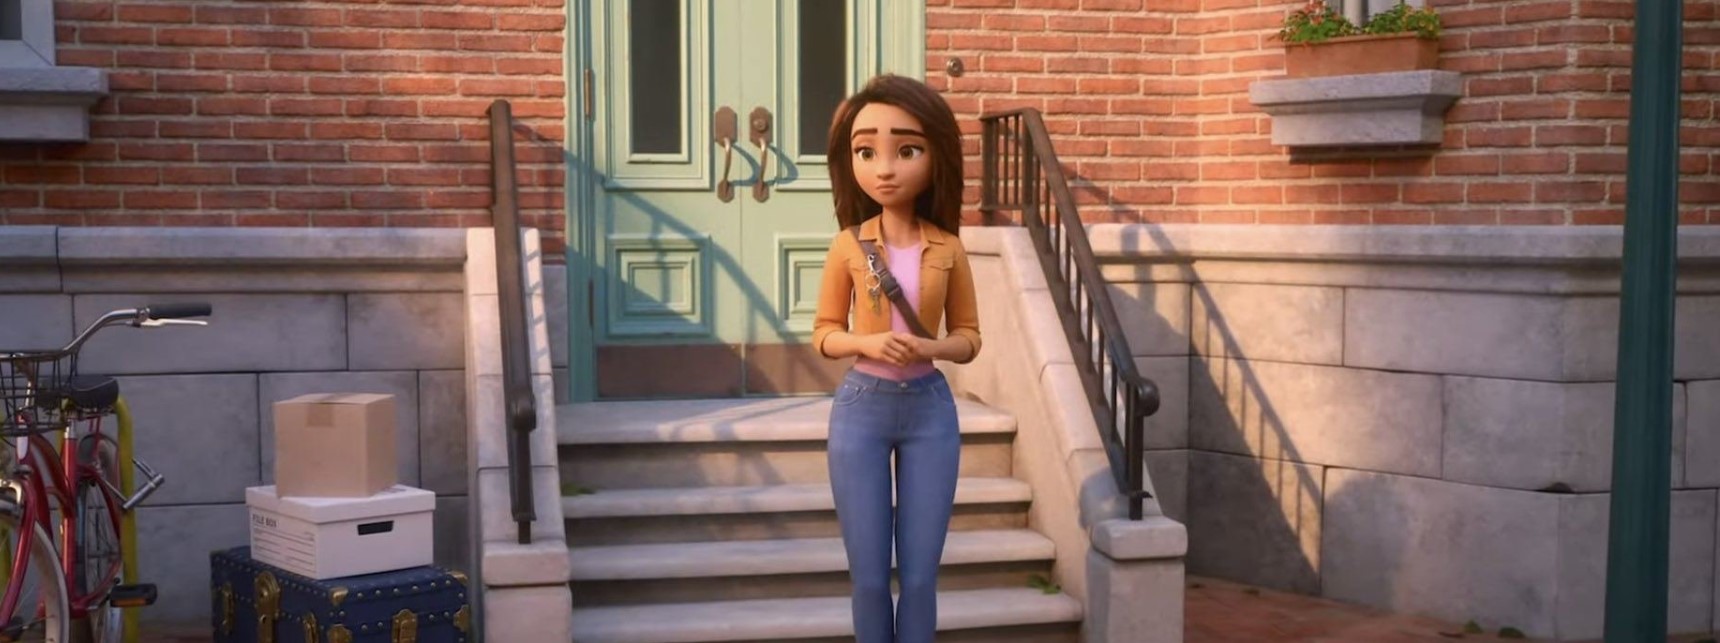 7 Animated Movies Like Luck You Must See